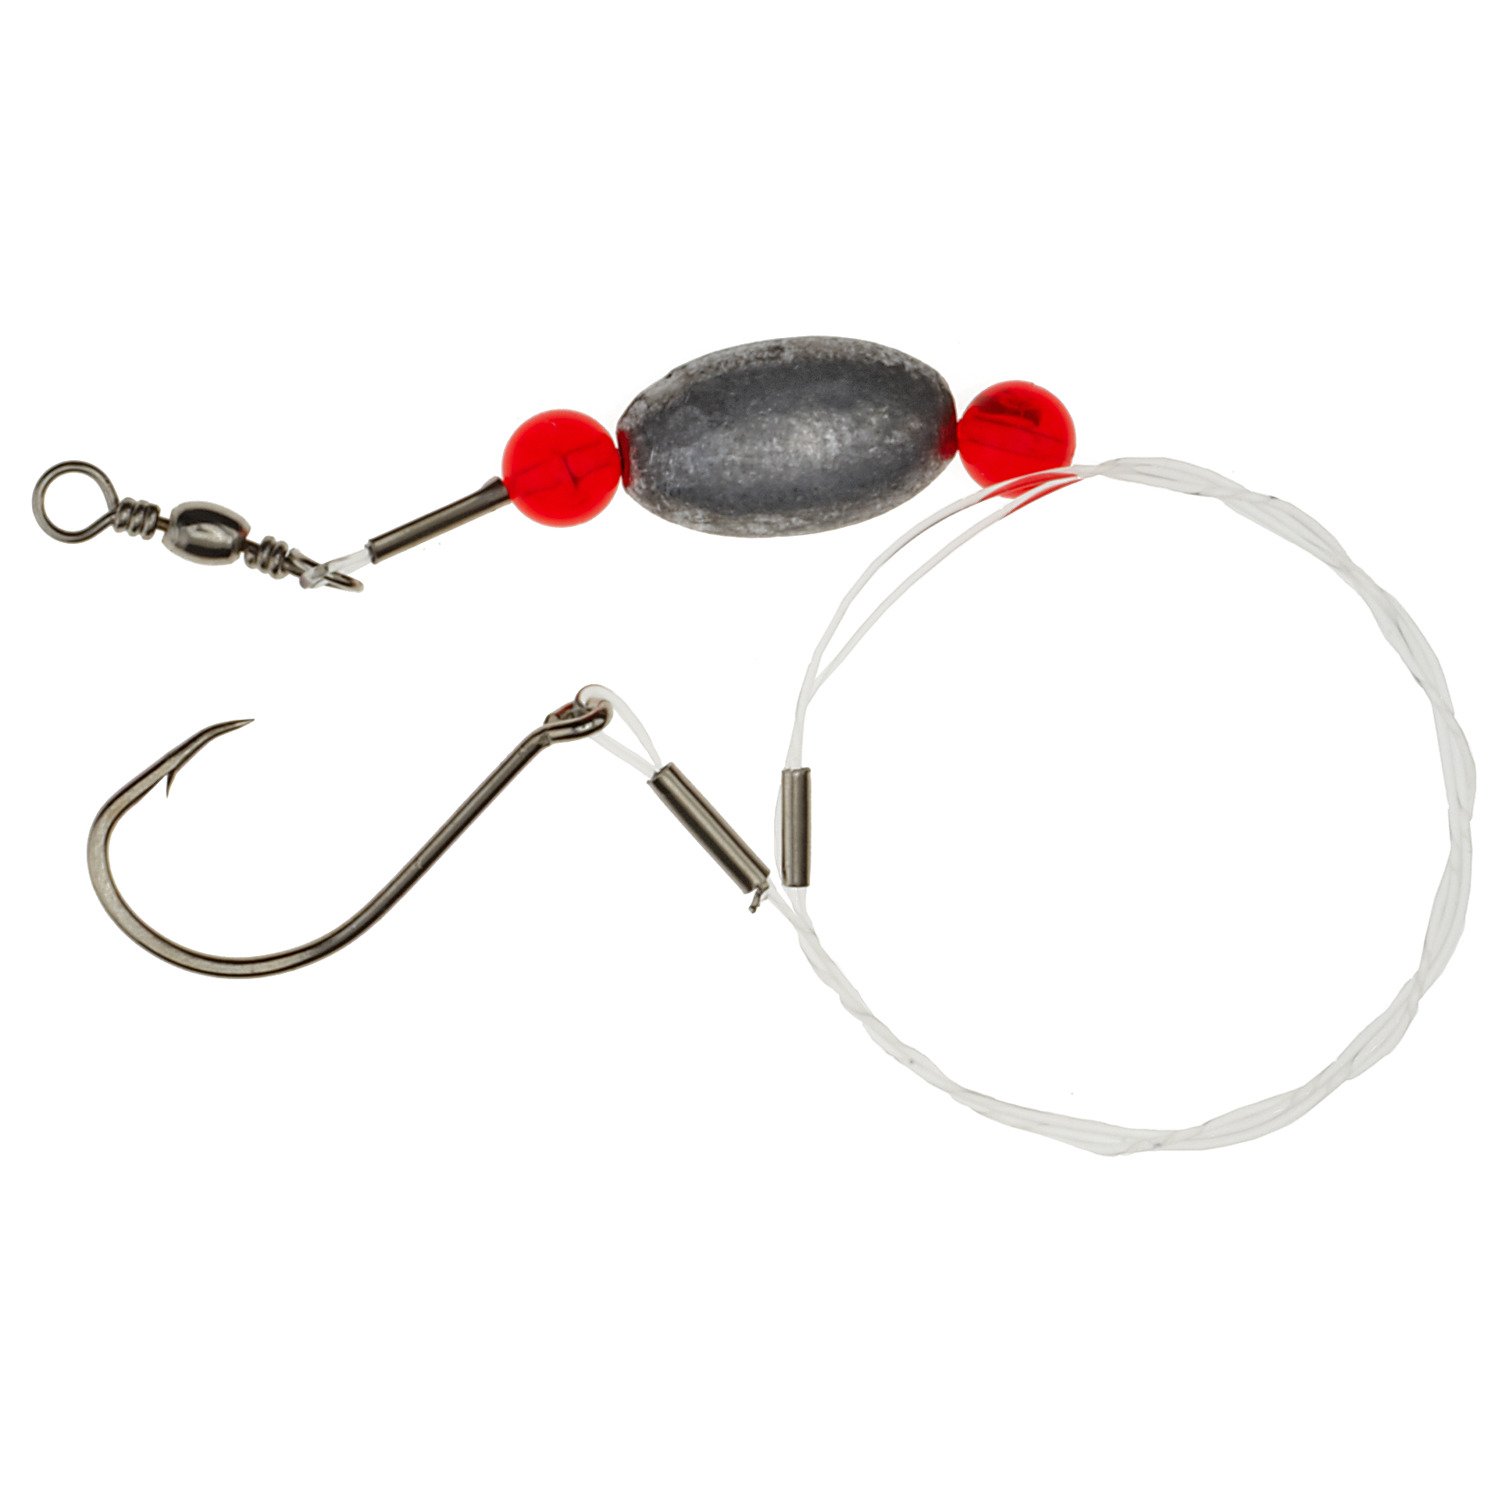 What are some good brands of redfish rigs?